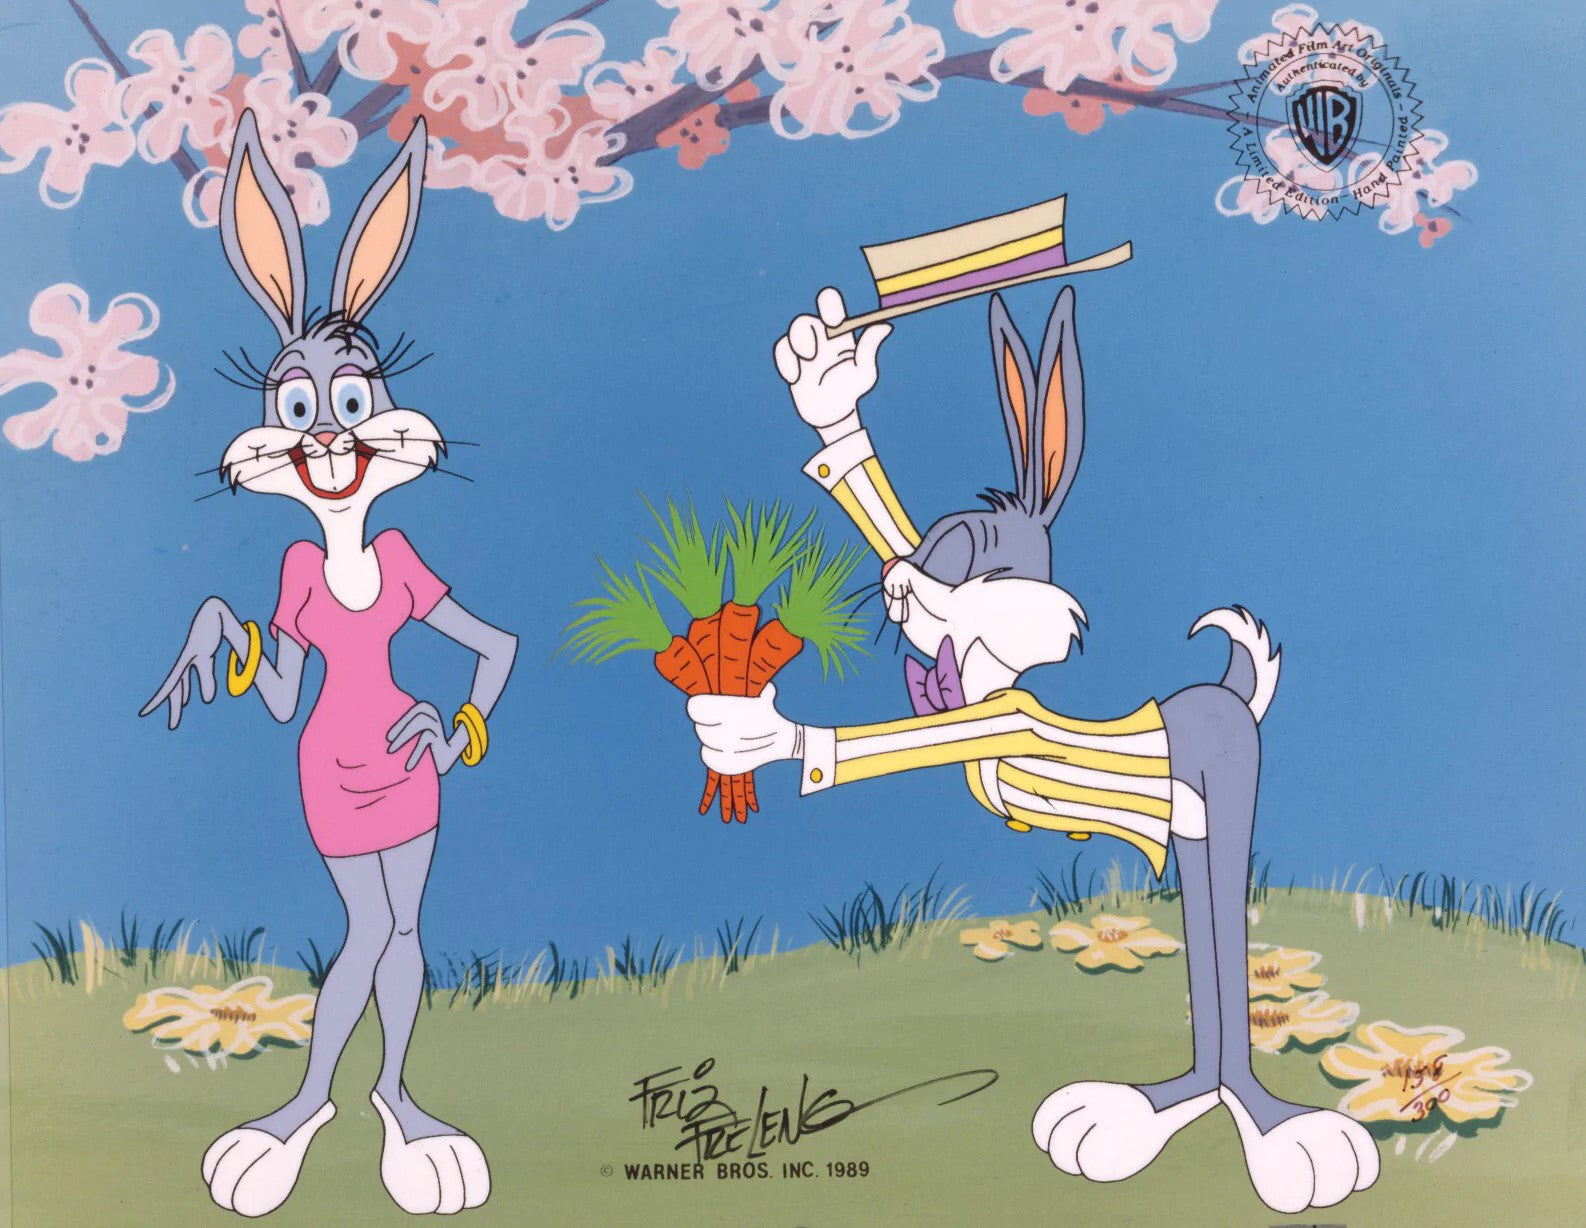 Bugs Courts Bonnie - By Friz Freleng - Limited Edition Hand-Painted Cel